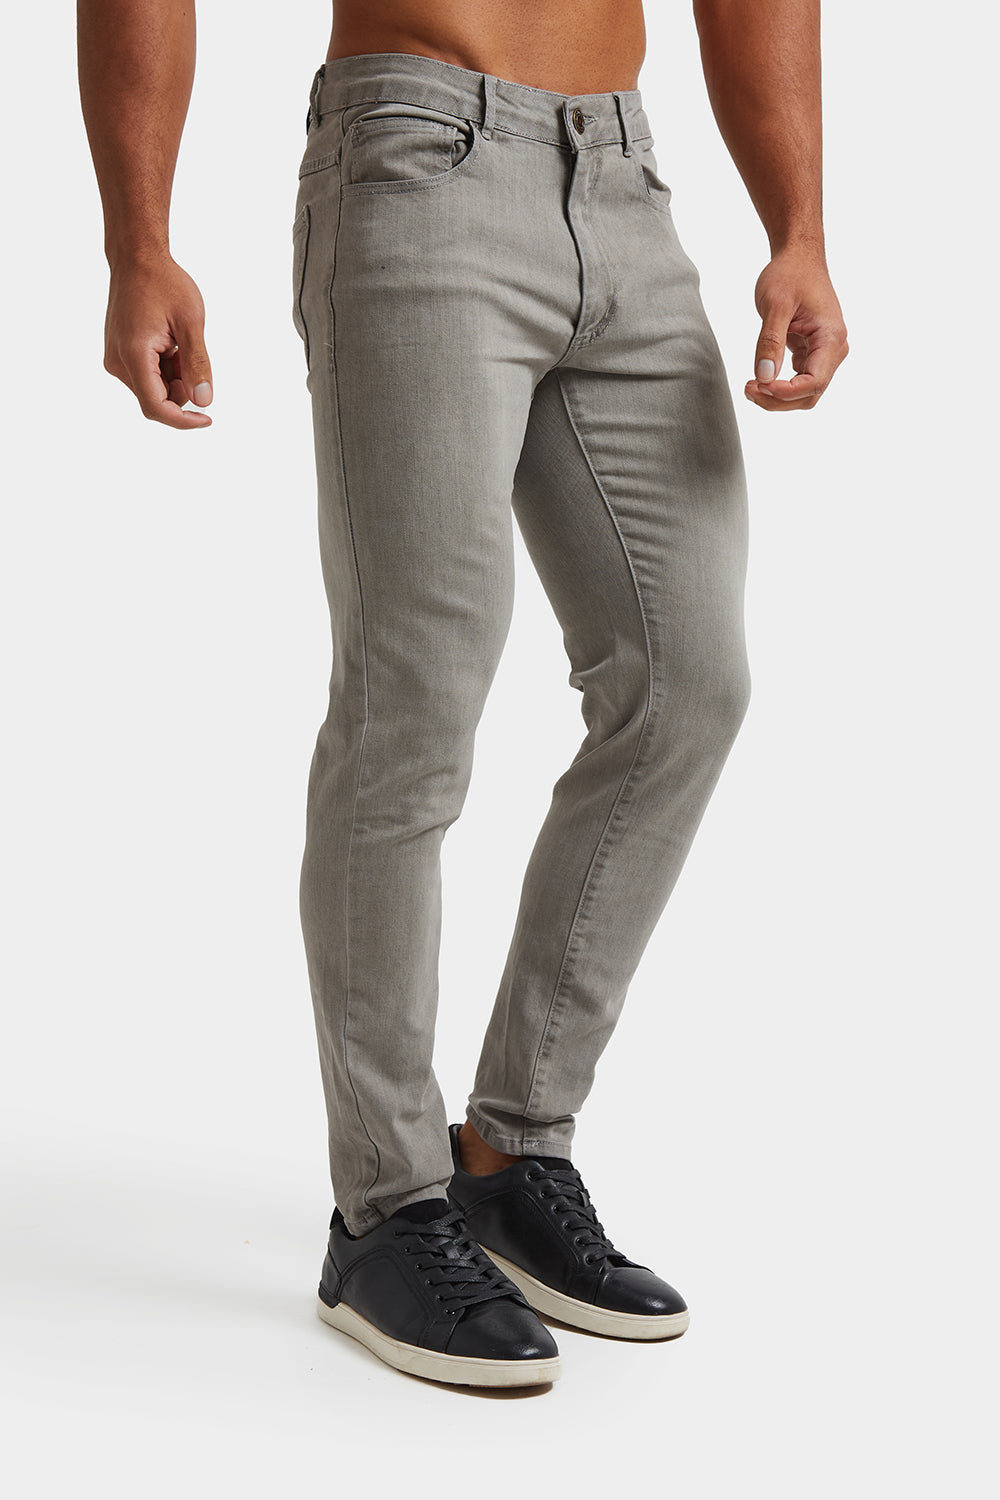 Light Grey Straight Fit Mens Jeans